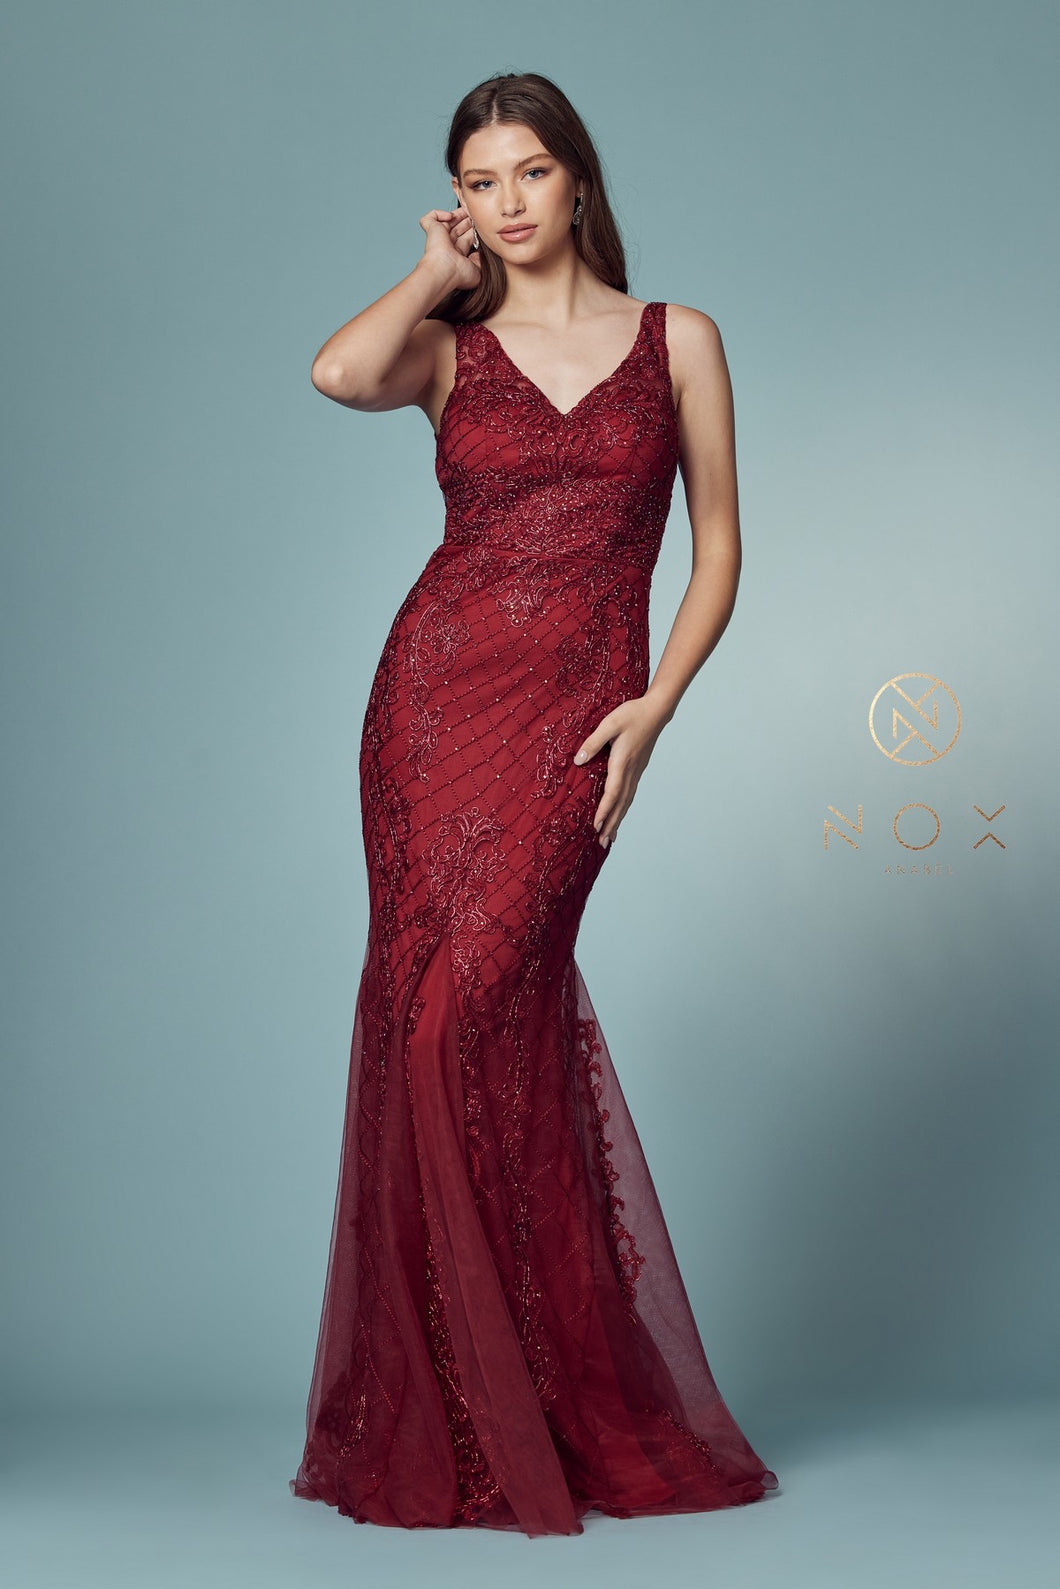 N A398 - Bead Lace Appliqued Fit & Flare Prom Gown with V-Neck & Open Back PROM GOWN Nox 2 BURGUNDY 